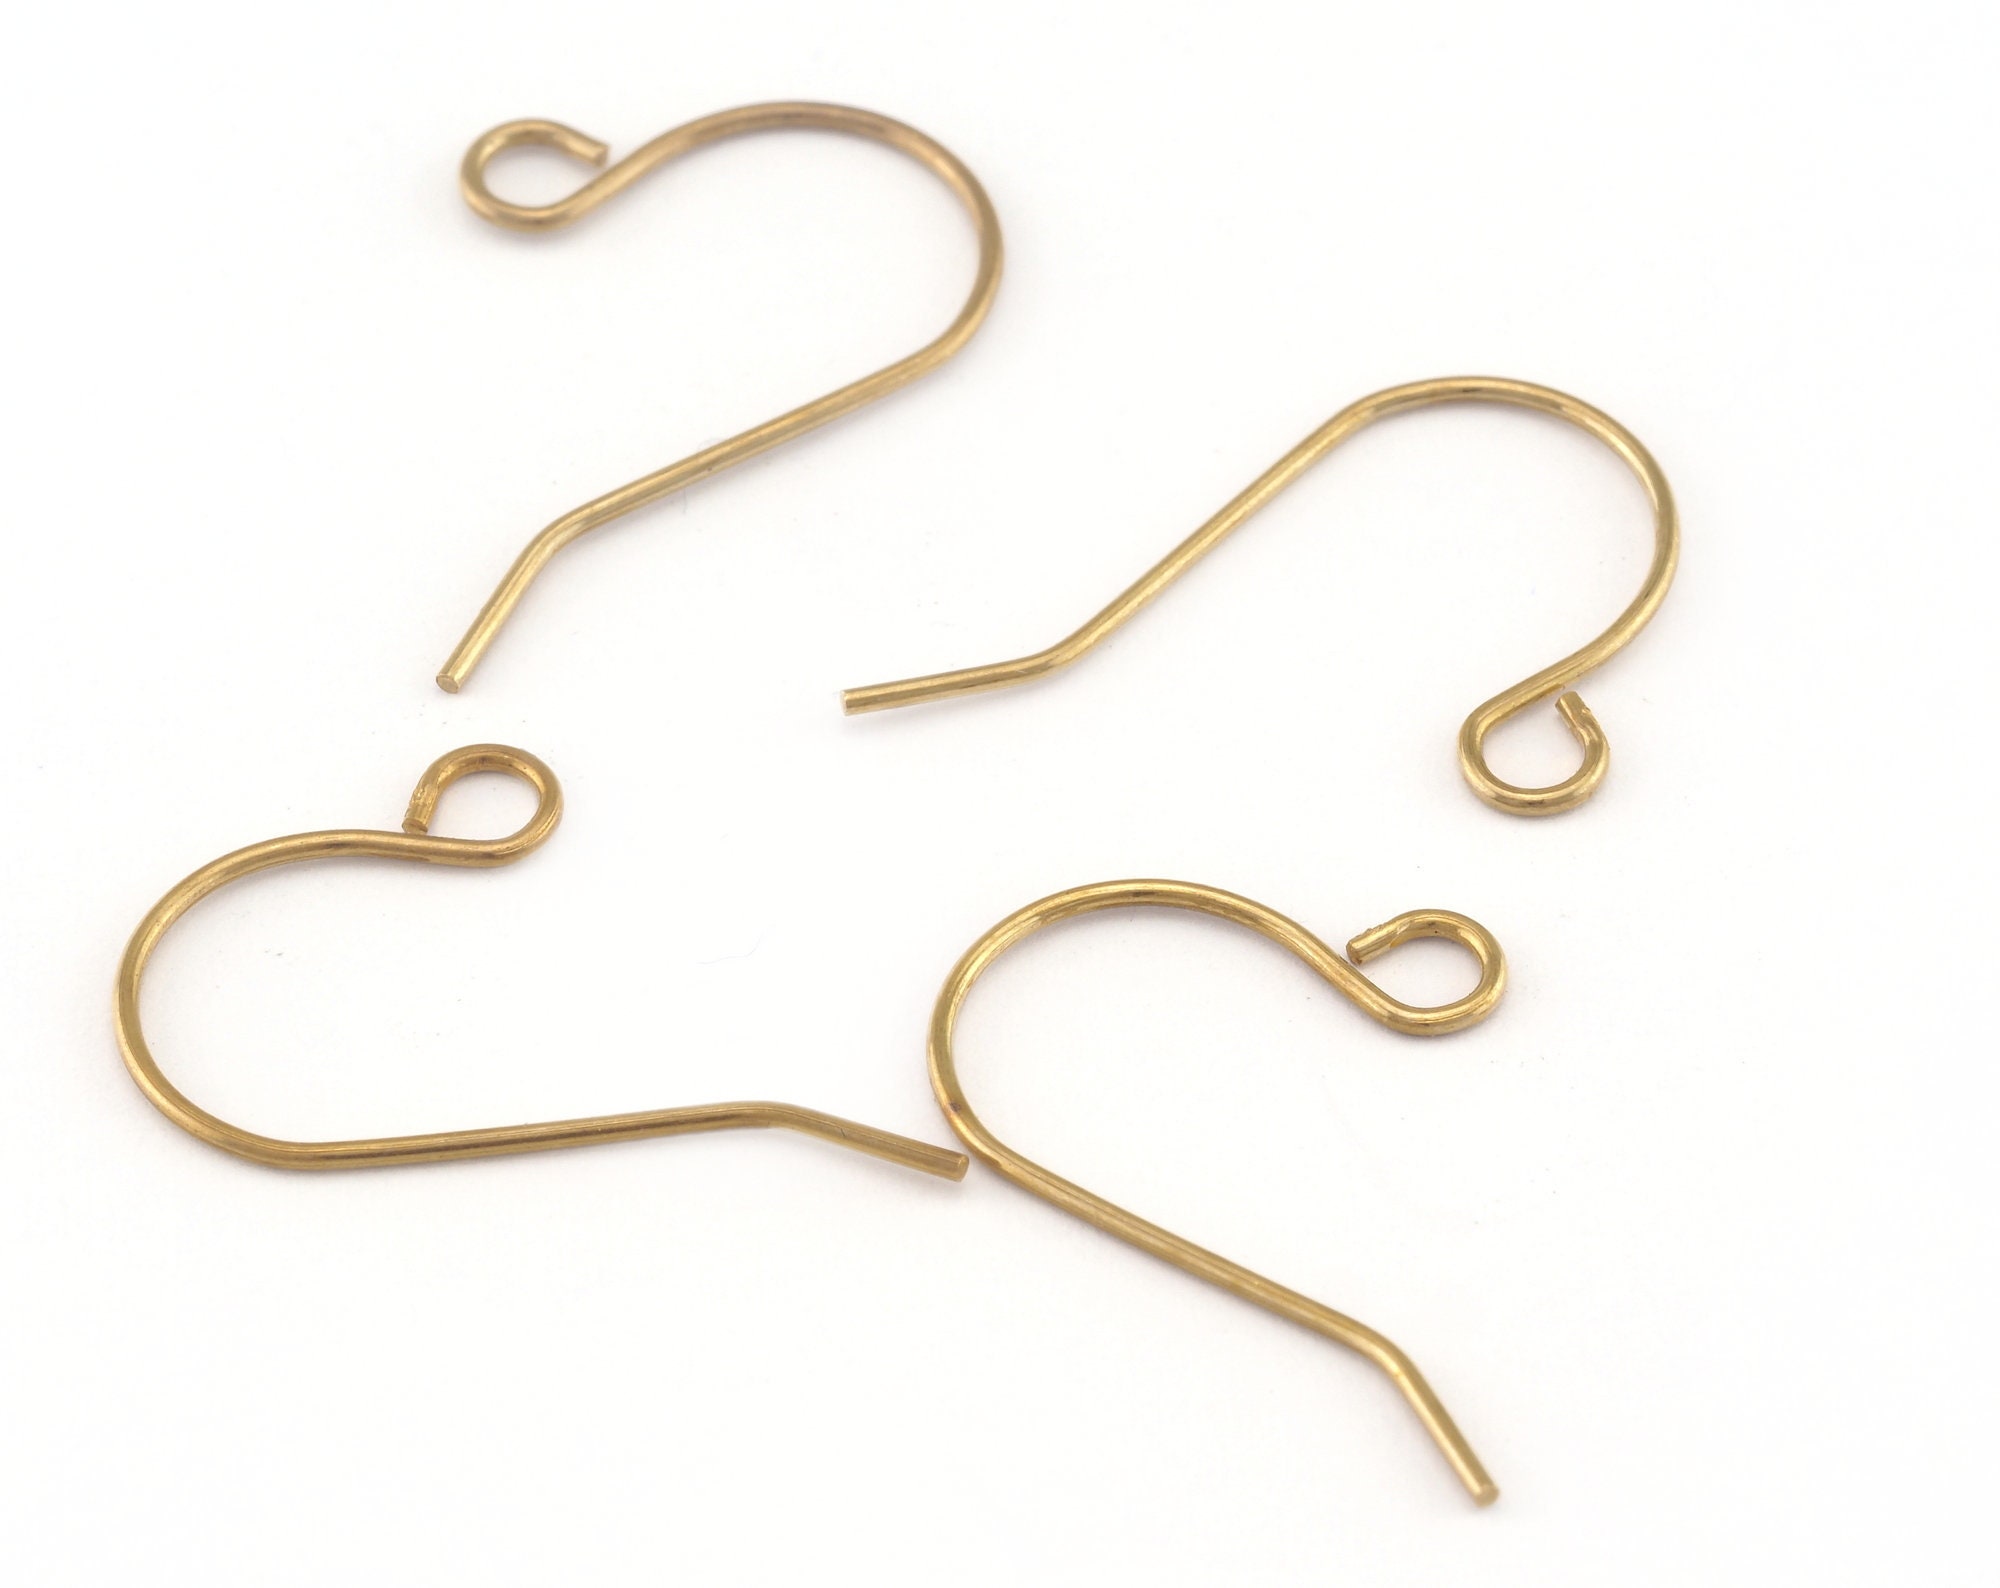 19mm gold plated metal fish hook ear wires, 48 ct. (24 pair) – My Supplies  Source